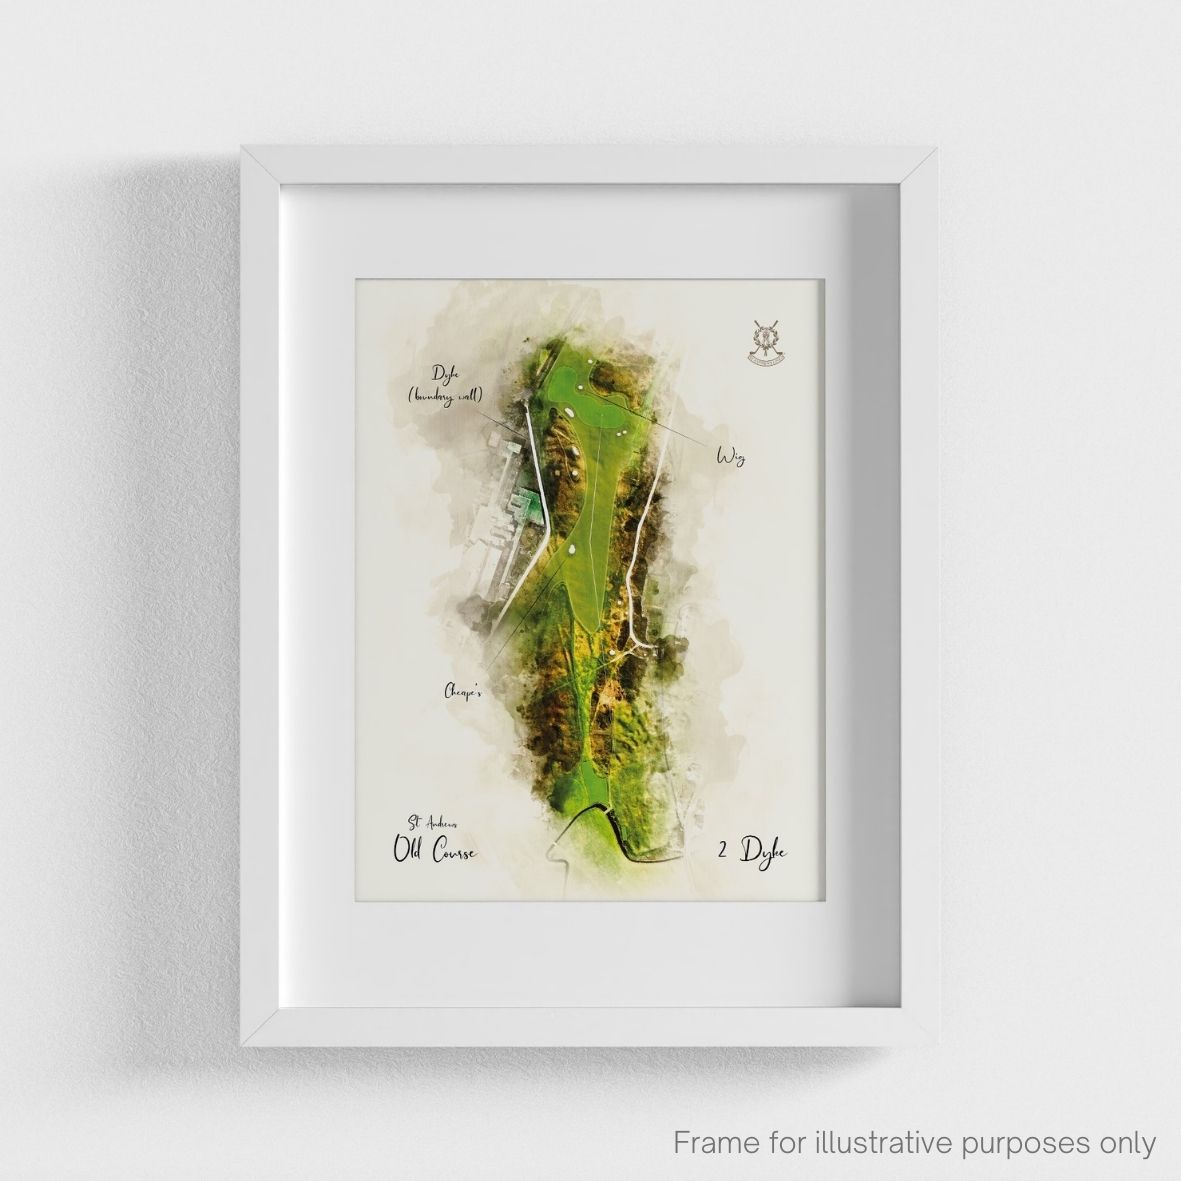 St Andrews Hole 2 WaterMap Print shown in a white frame